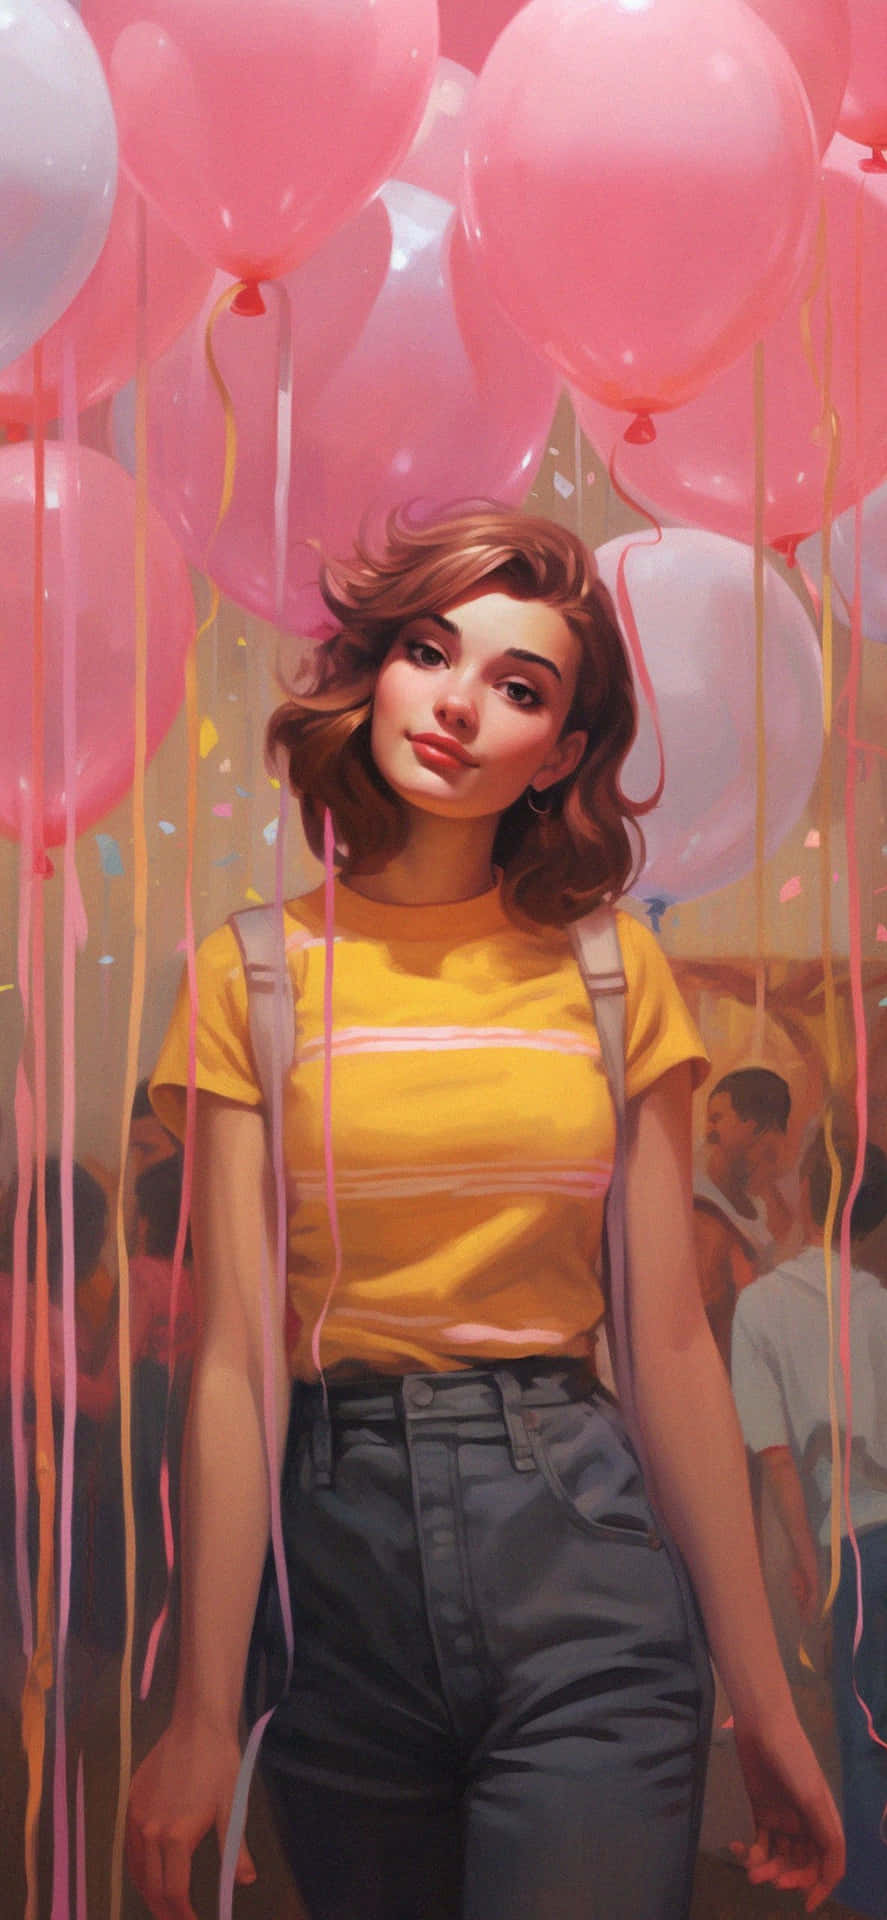 Preppy Girl With Pink Balloons Wallpaper